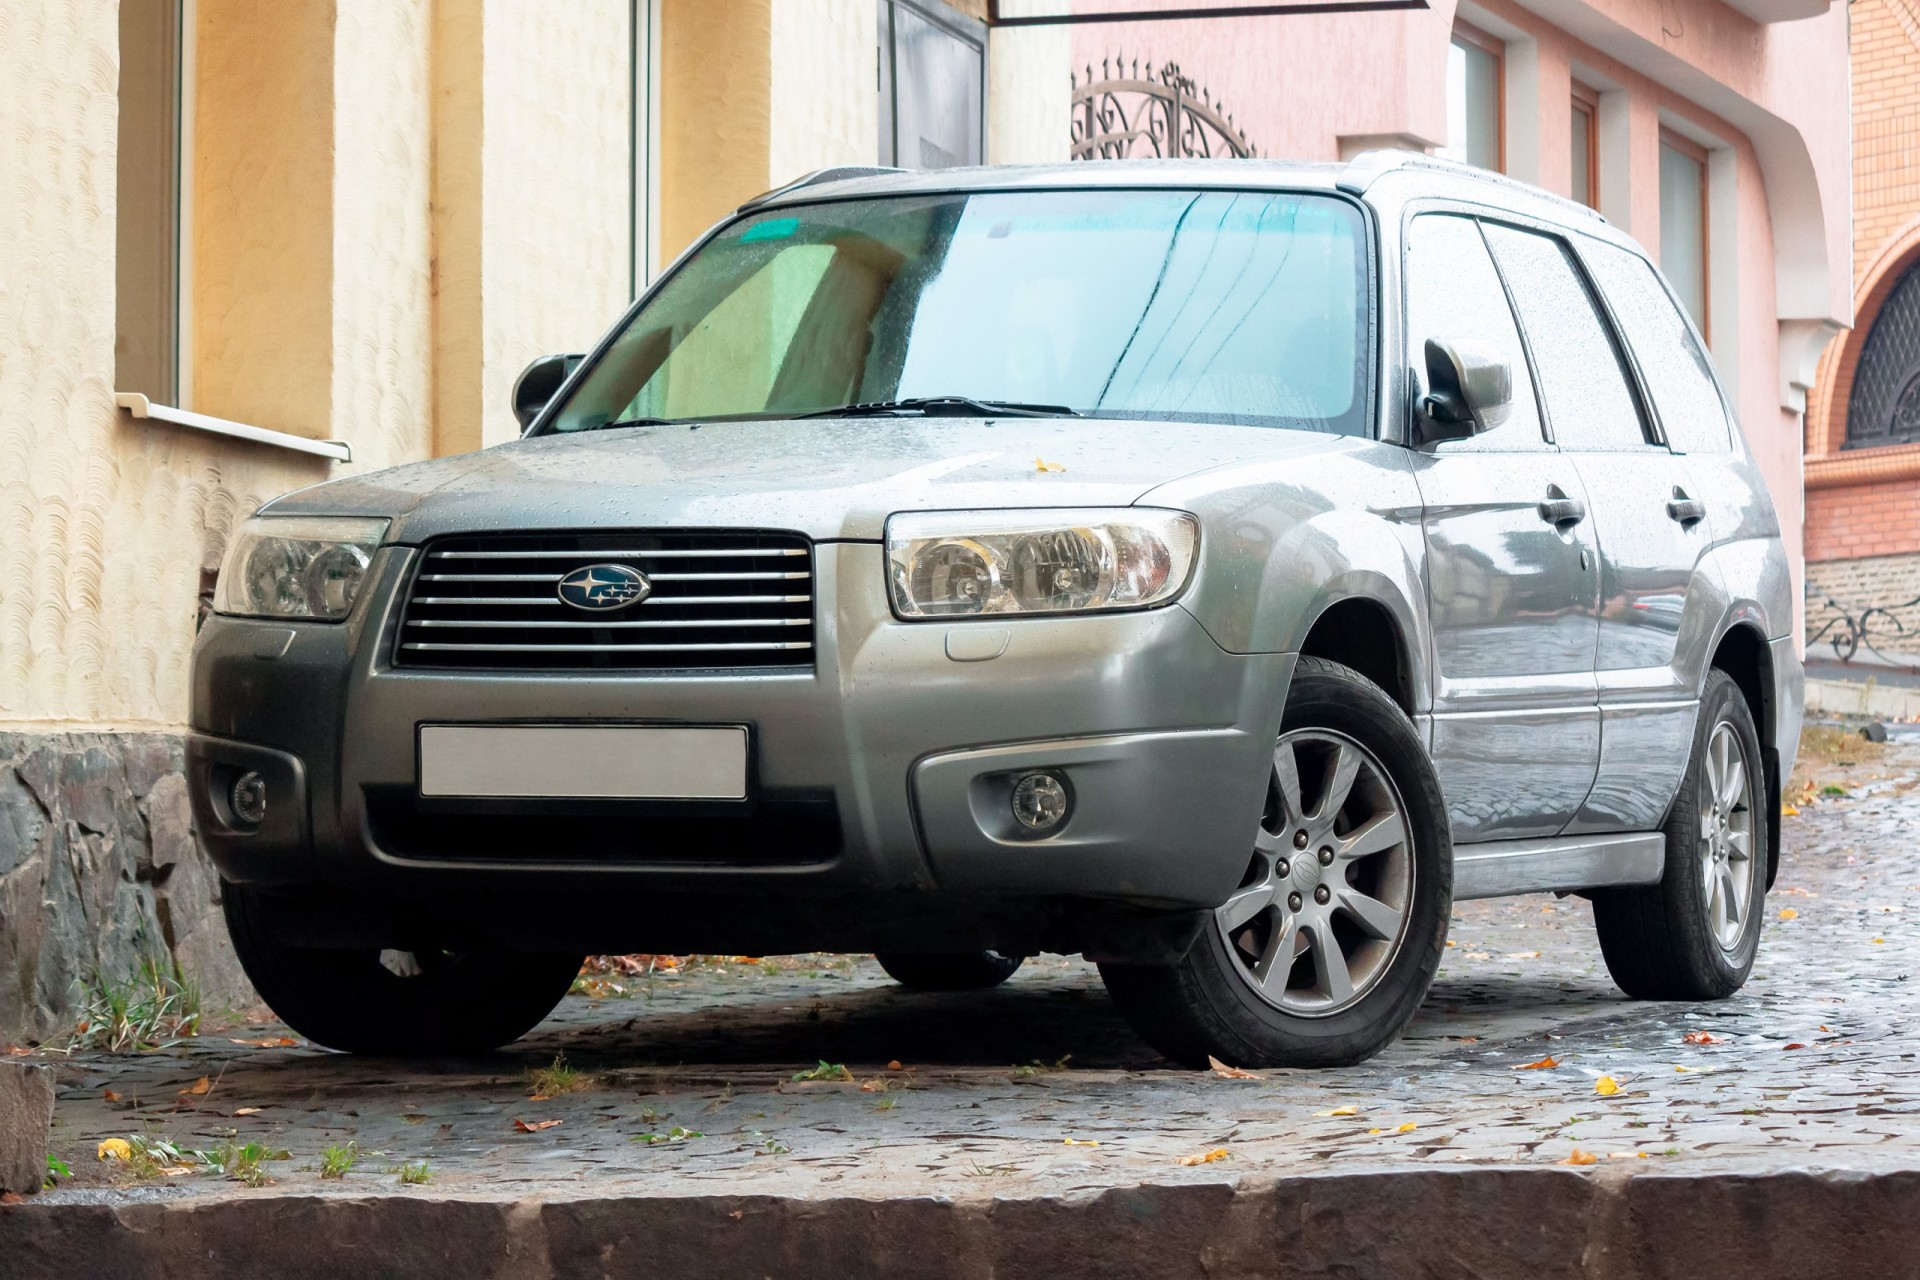 2007 silver Subaru Forester suv parked on the pavement. 